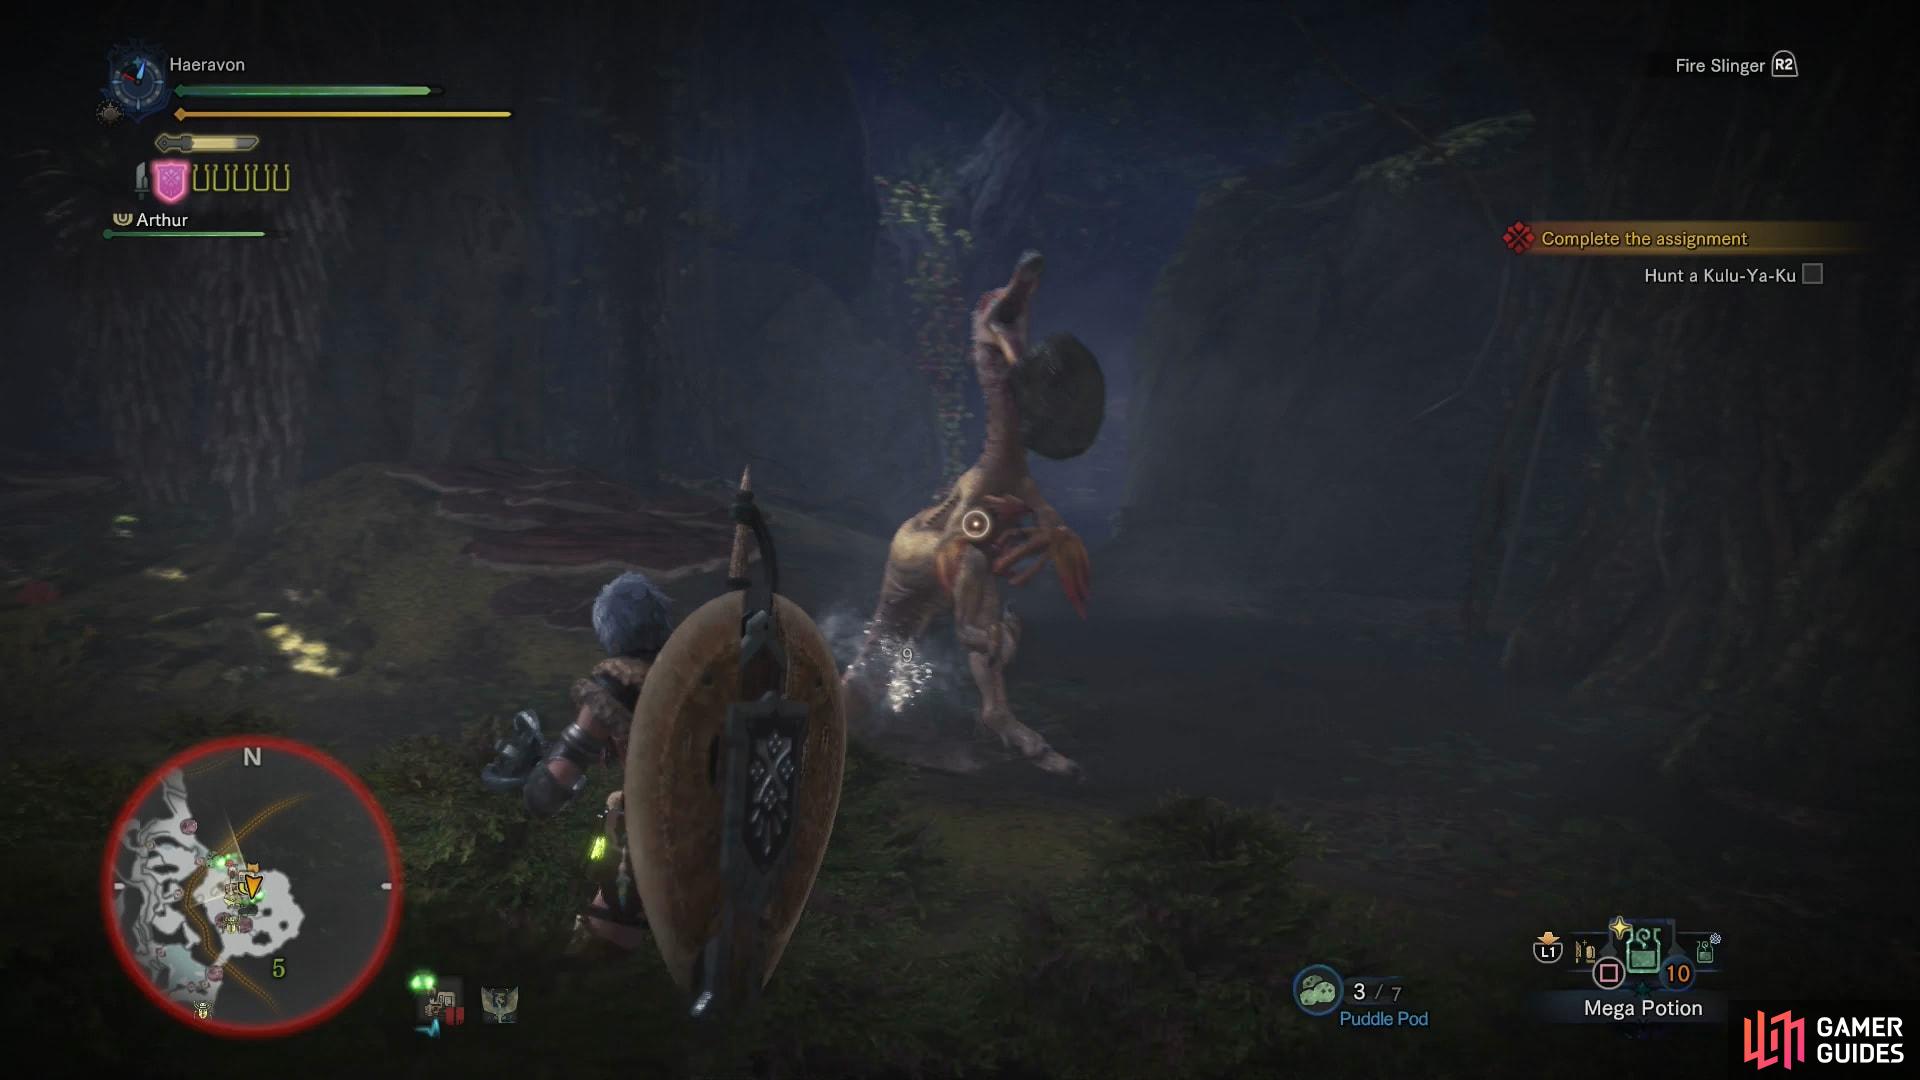 Pelting the Kulu-Ya-Ku with your Slinger may cause it to drop its boulder